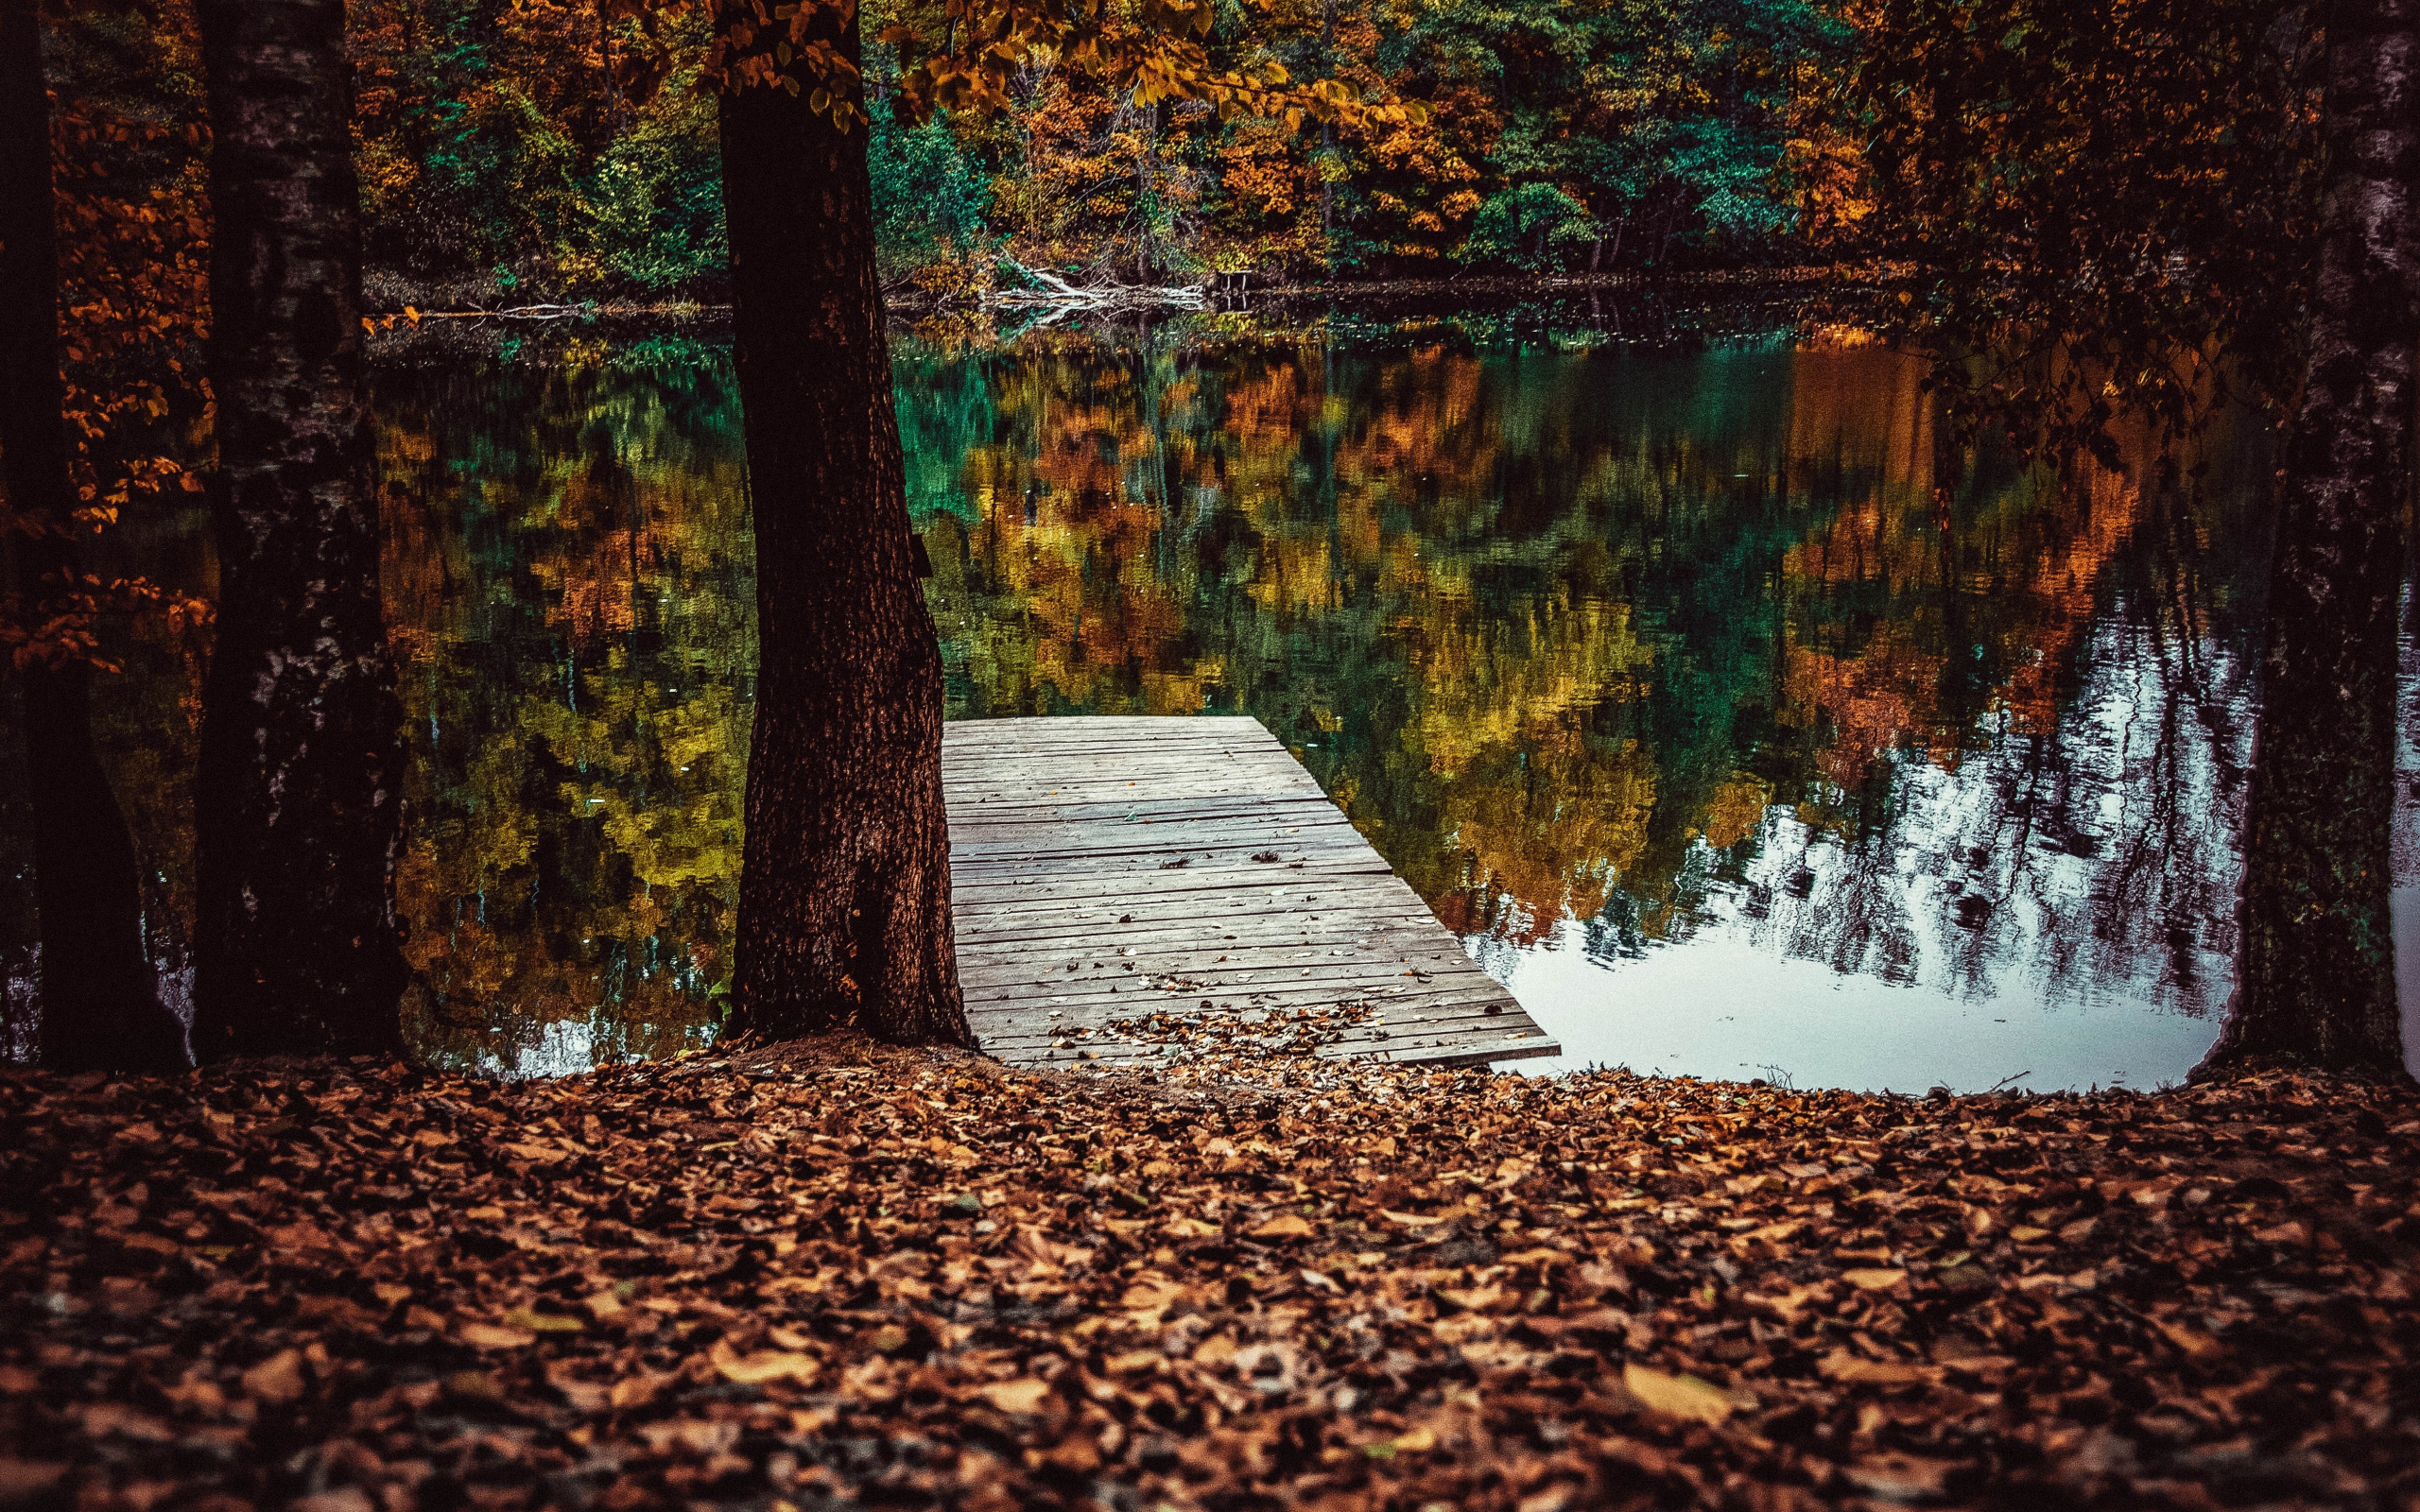 Download 2560x1600 wallpaper pier, lake, fall, leaves, autumn, lake, reflections, dual wide, widescreen 16: widescreen, 2560x1600 HD image, background, 15753